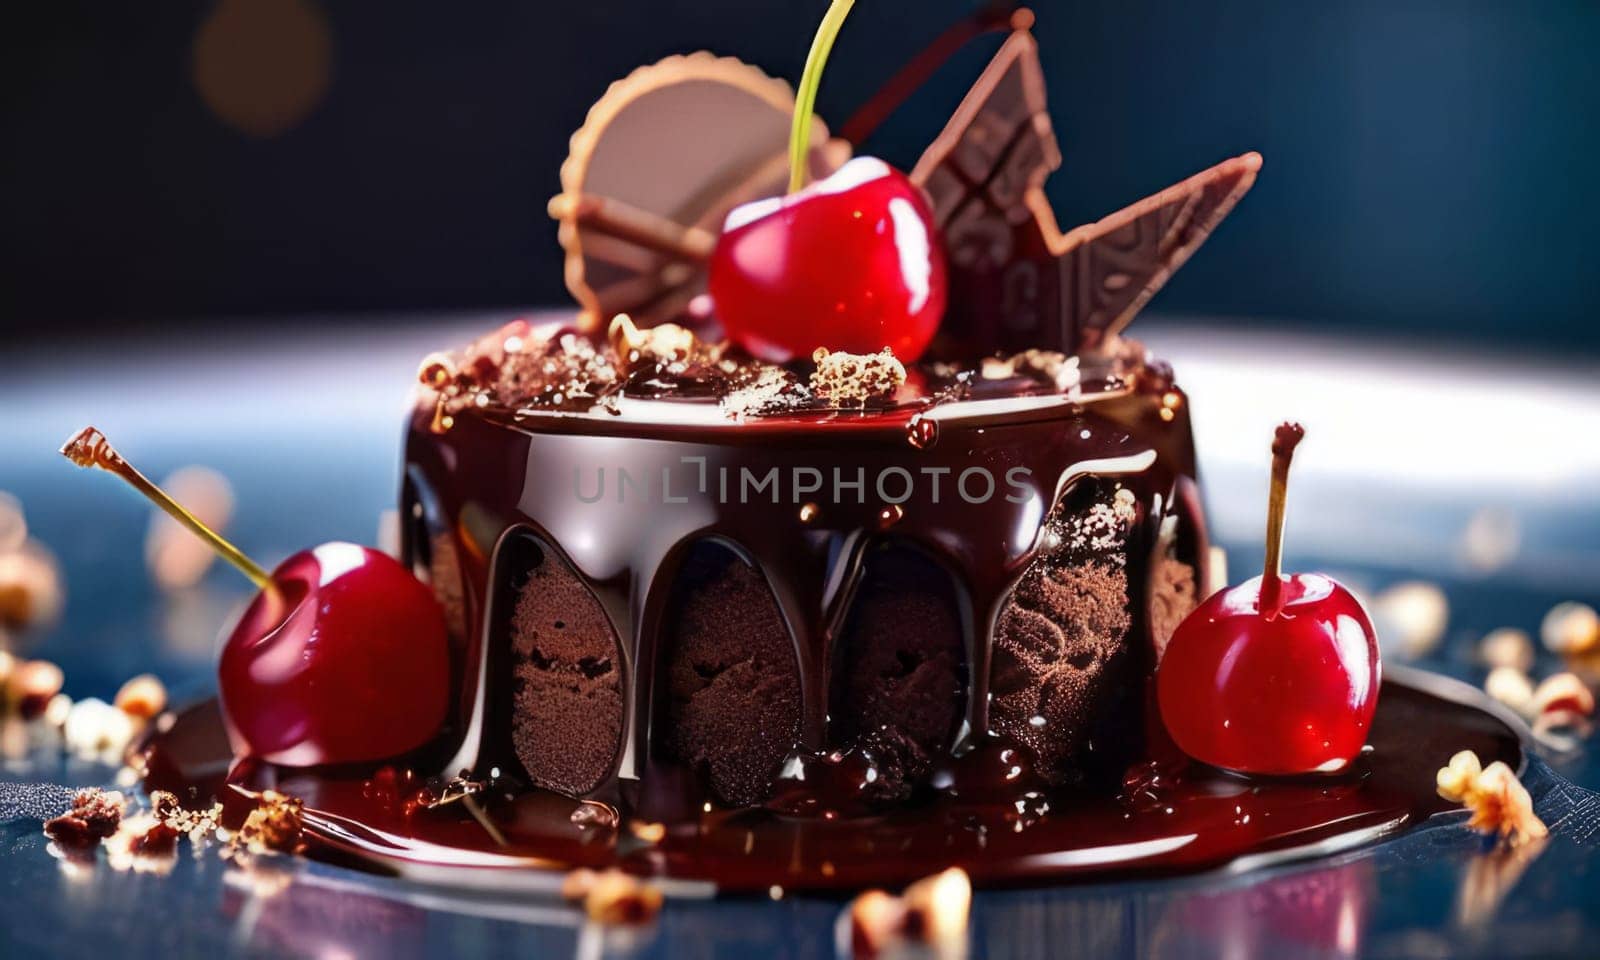 Decadent chocolate cake topped with luscious cherries, drizzled with rich chocolate sauce. For creating recipes on culinary websites, blogs, promoting food products on social media platforms. by Angelsmoon